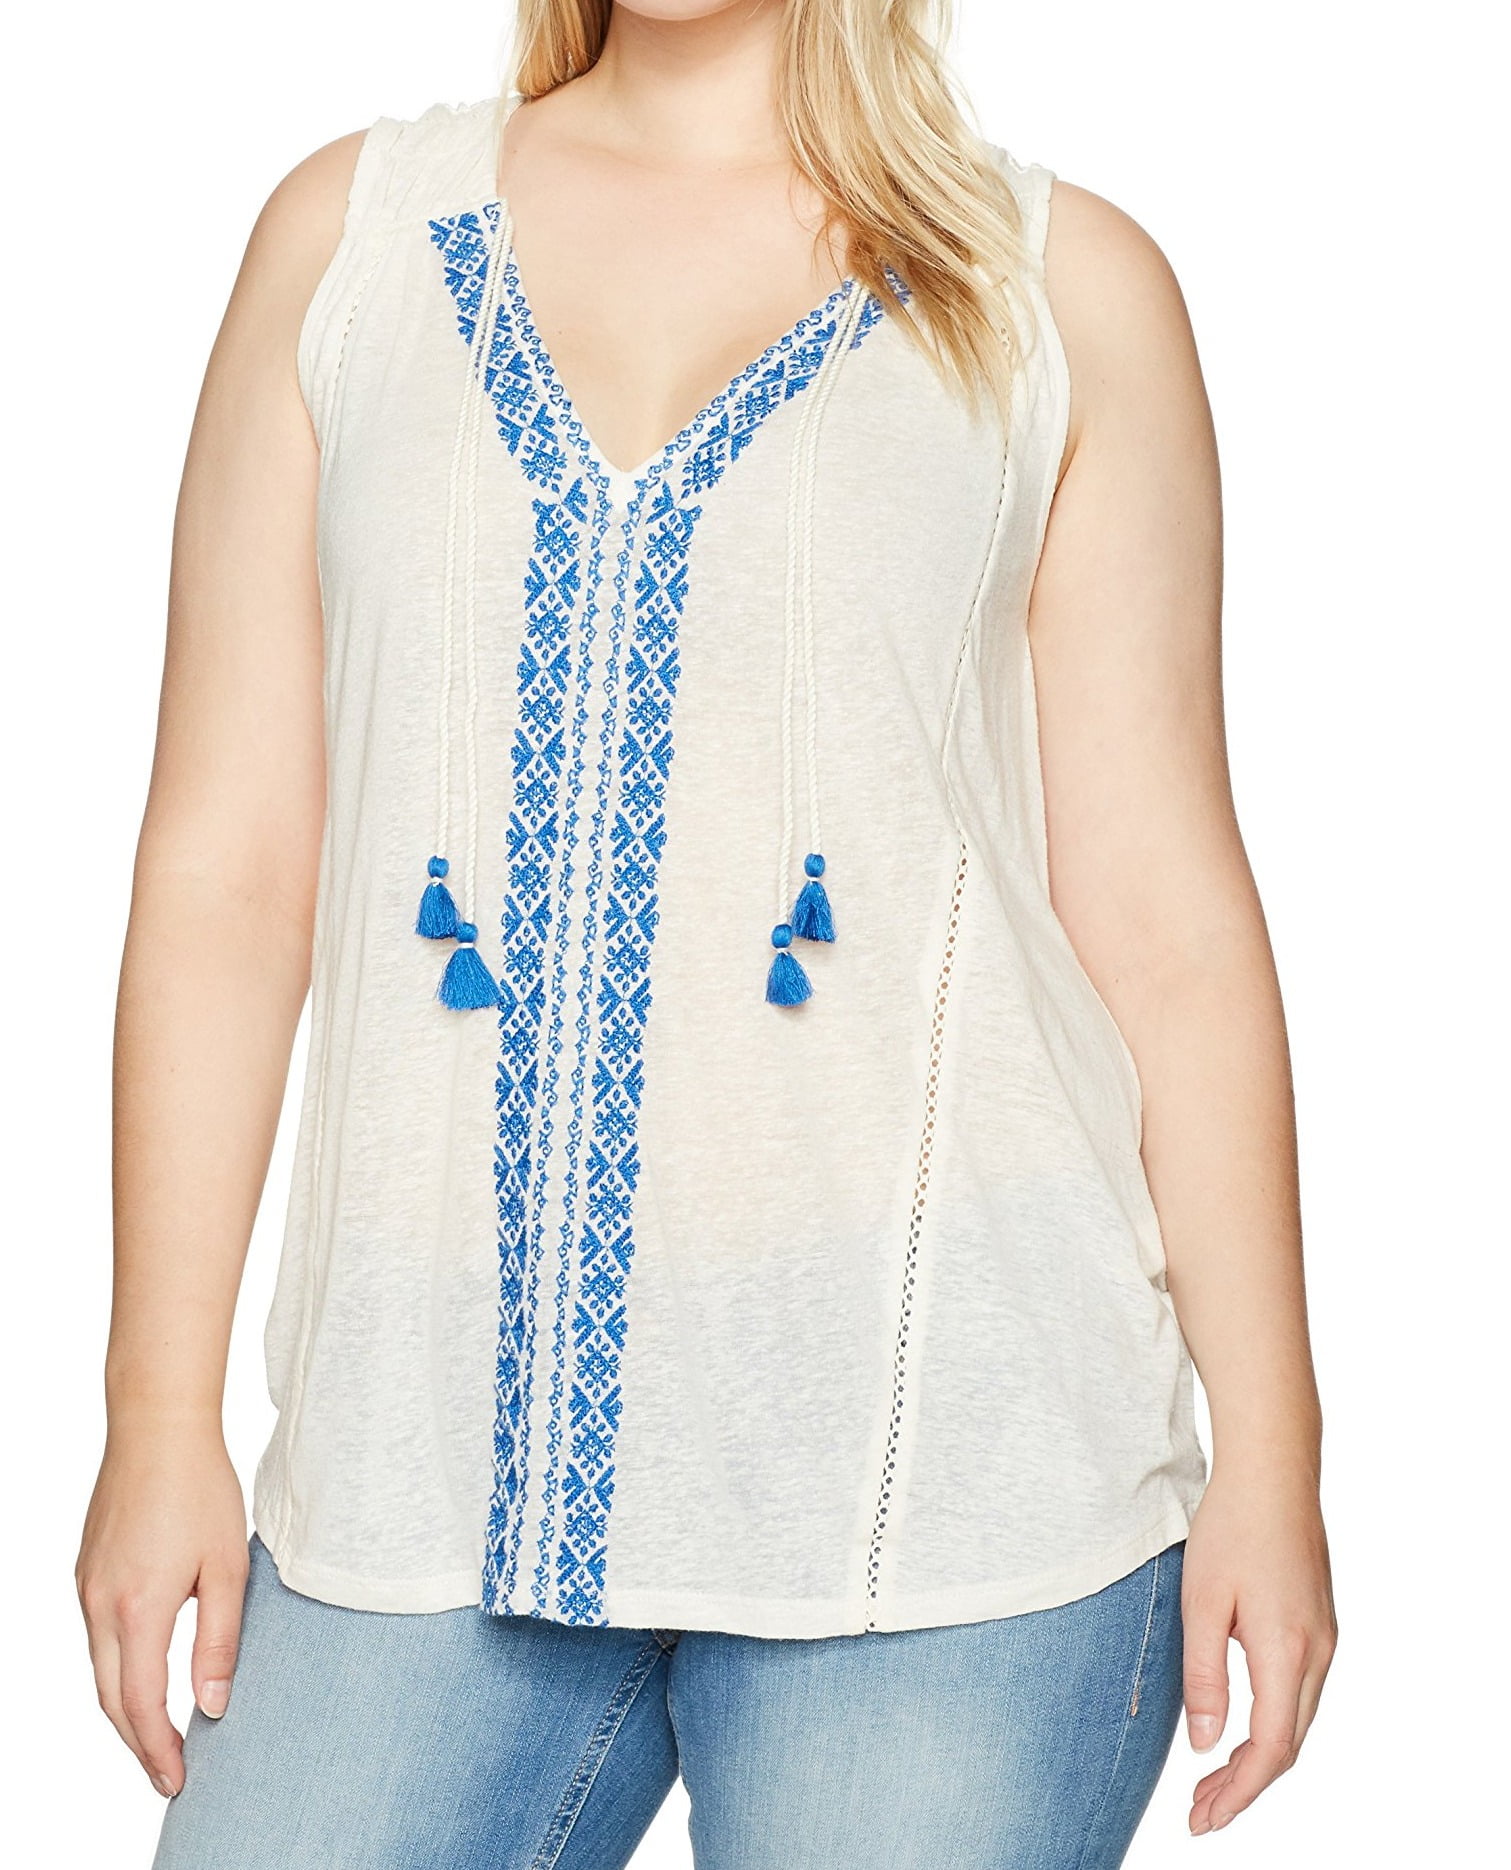 Lucky Brand - Lucky Brand NEW White Ivory Womens Size 1X Plus ...